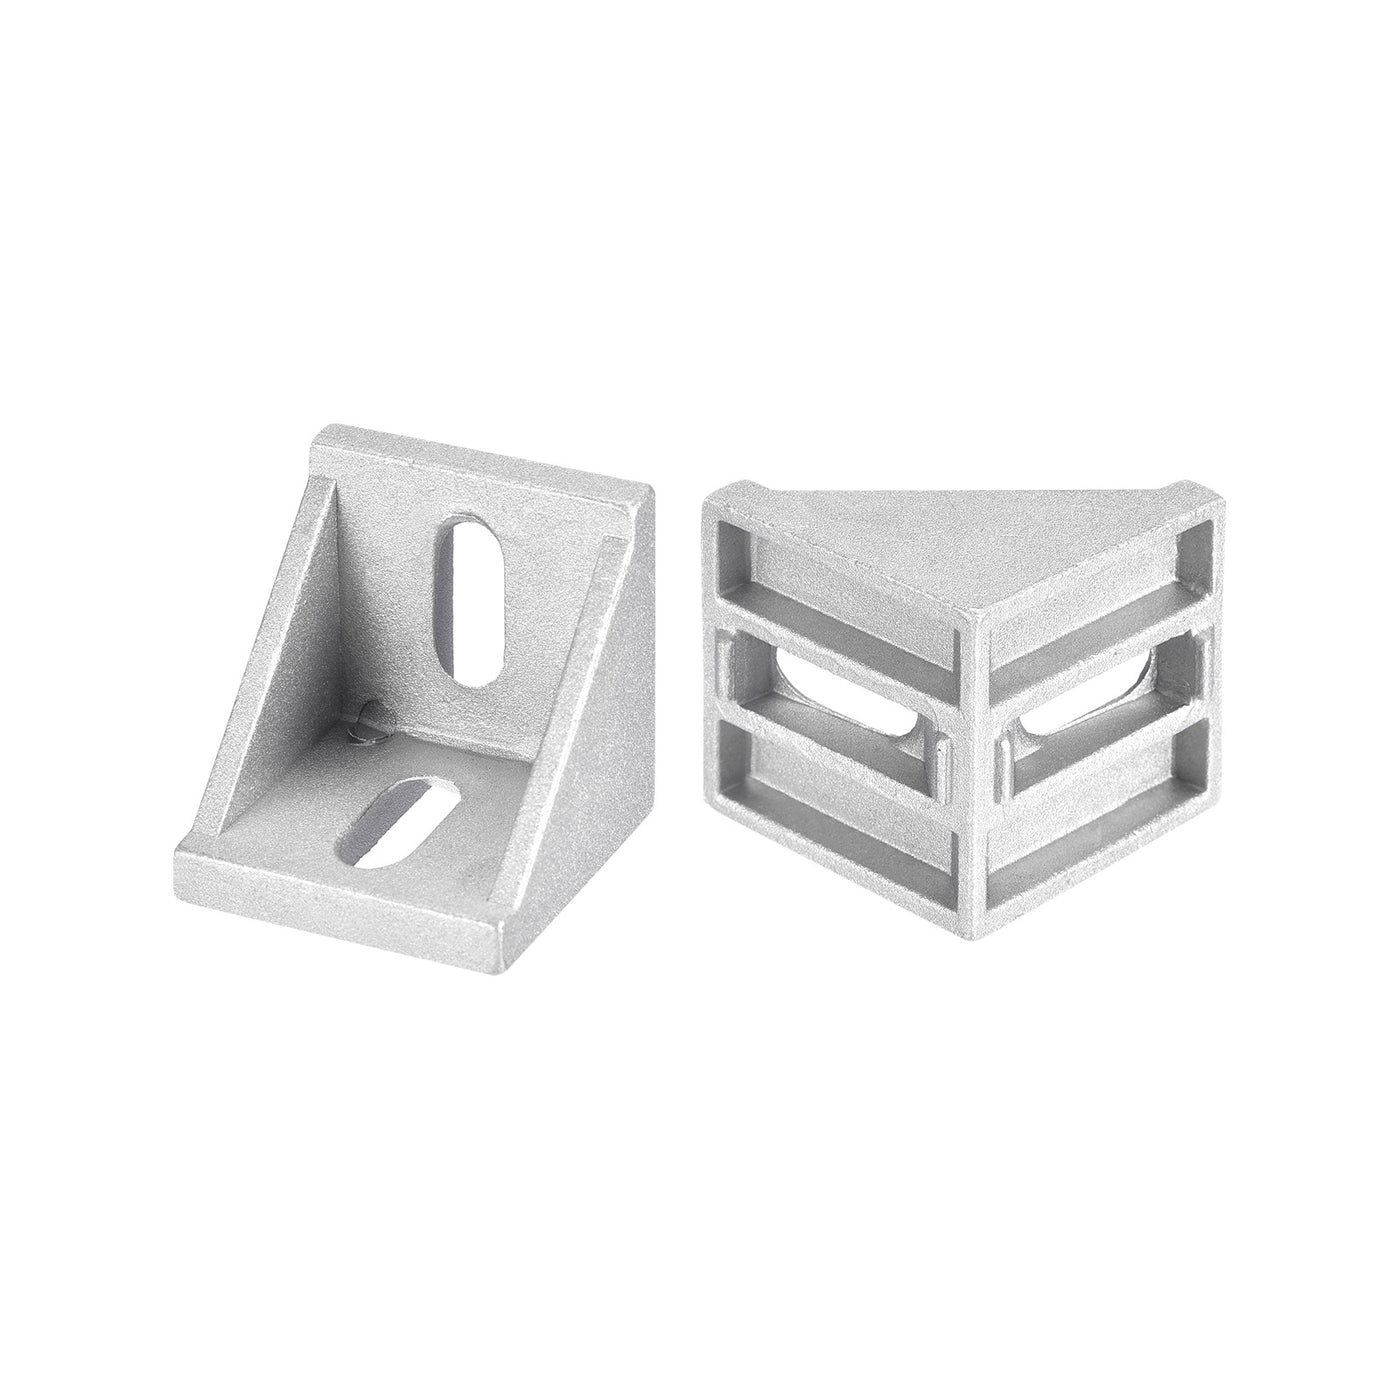 uxcell Uxcell 4Pcs Inside Corner Bracket Gusset, 42x42x41mm 4545 Angle Connectors for 4545/5050 Series Aluminum Extrusion Profile Silver